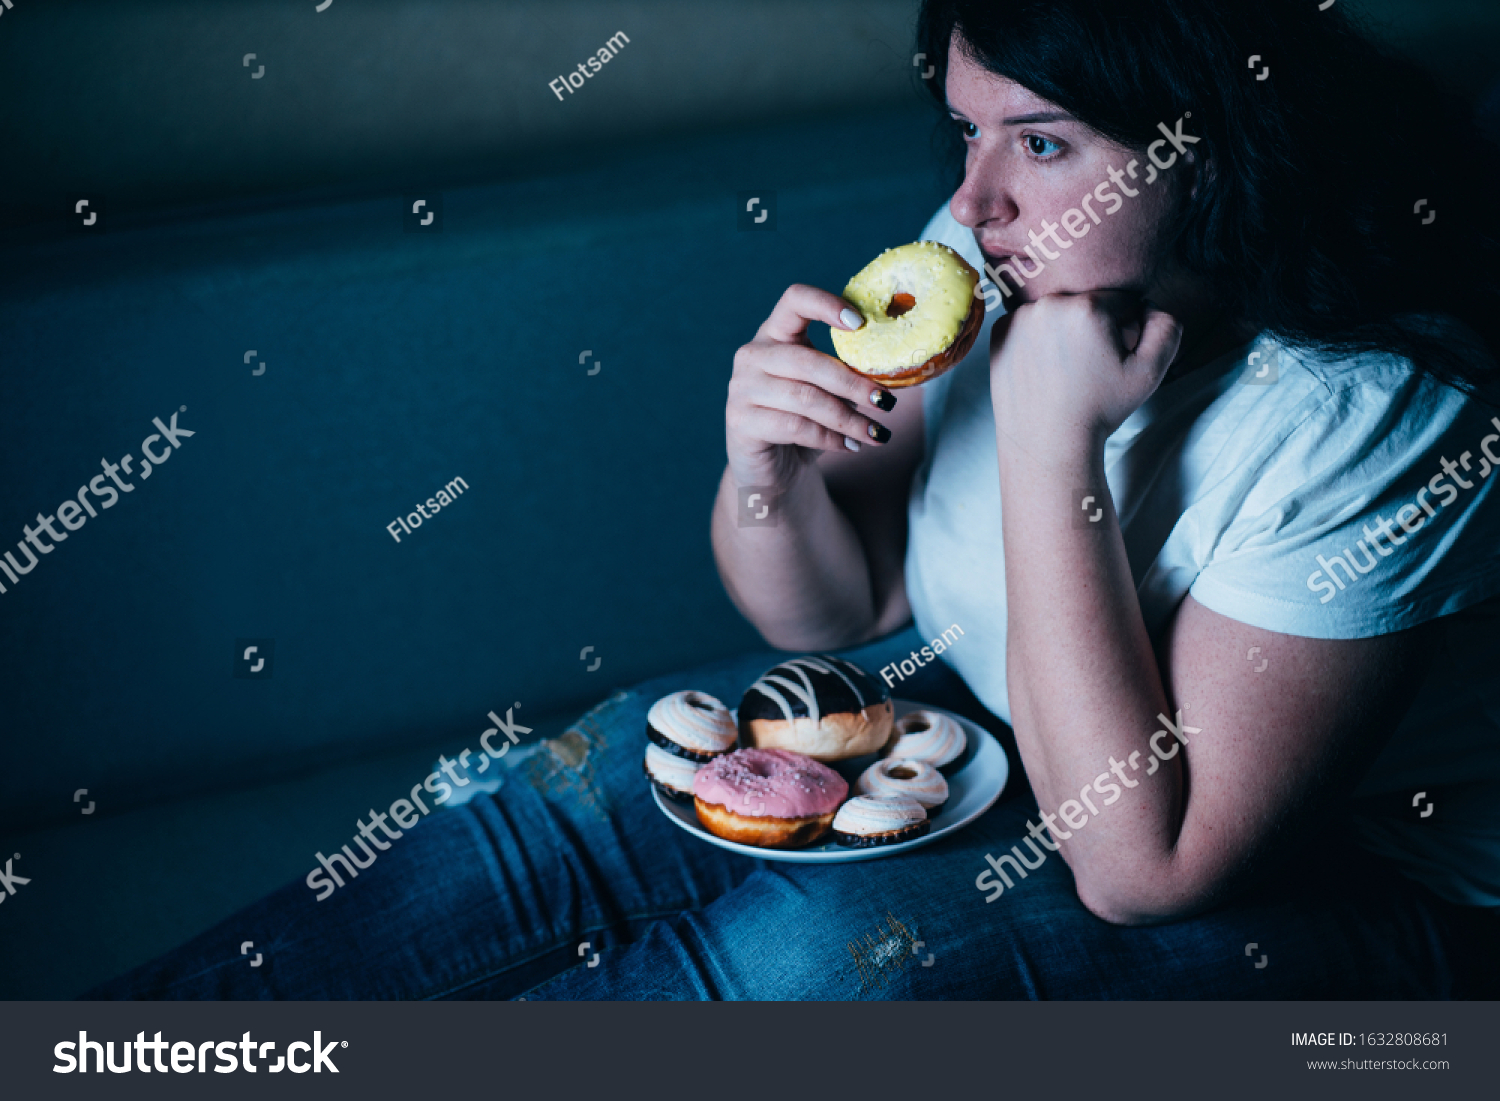 Sugar addiction, unhealthy lifestyle, weight gain, dietary, healthcare and medical concept. Cropped portrait of overweight depressed woman laying on sofa eating sugary food watching TV #1632808681